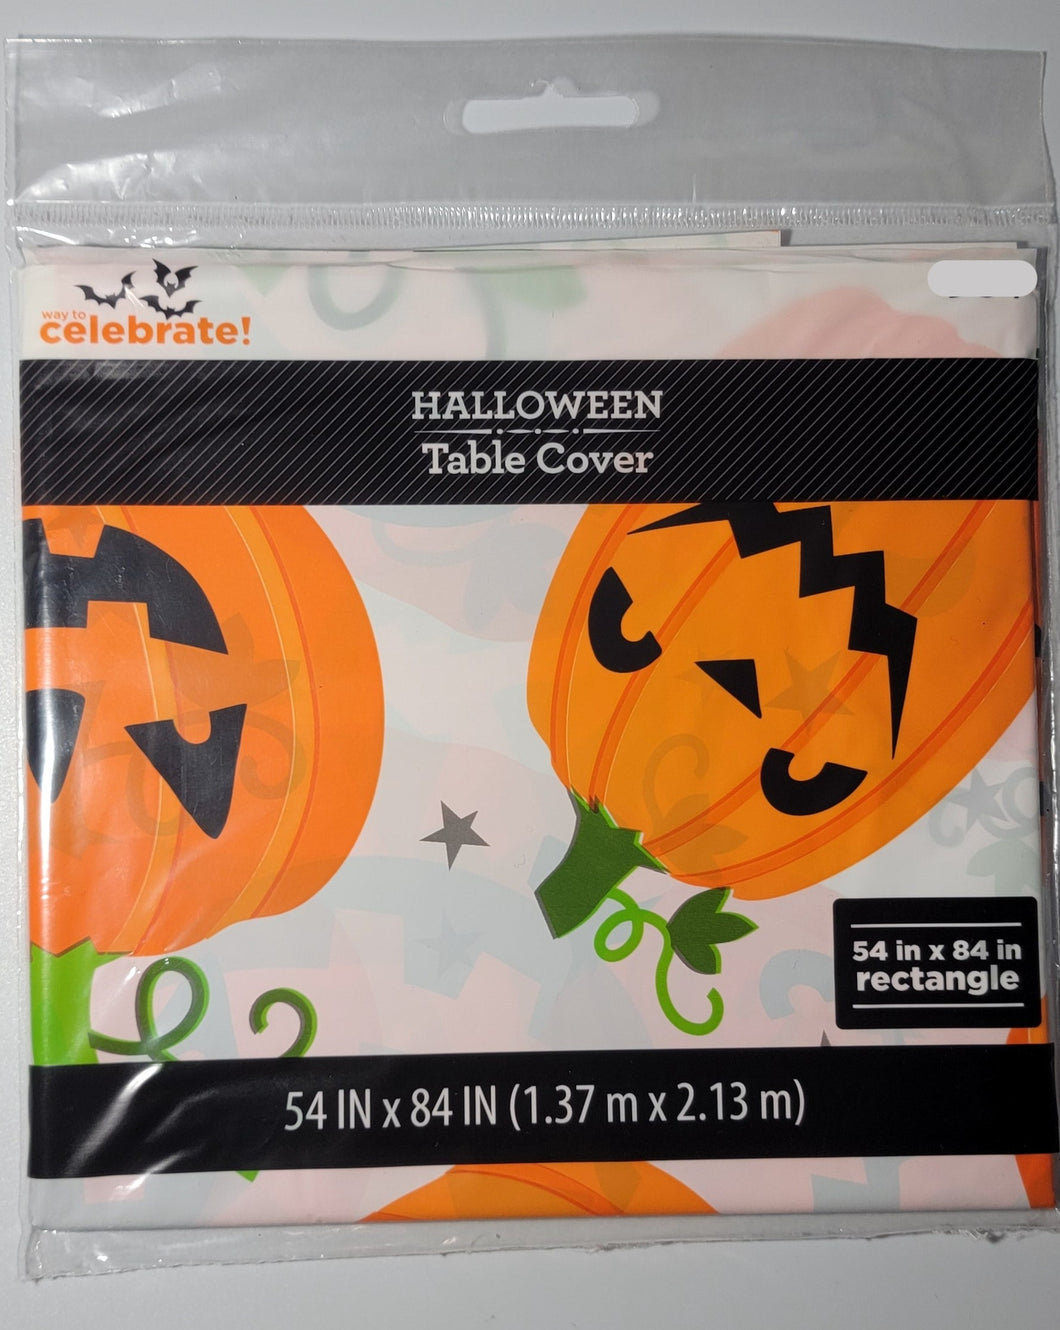 Halloween 4.5 ft x 7 ft Plastic Table Cover White with Orange Pumpkins Design